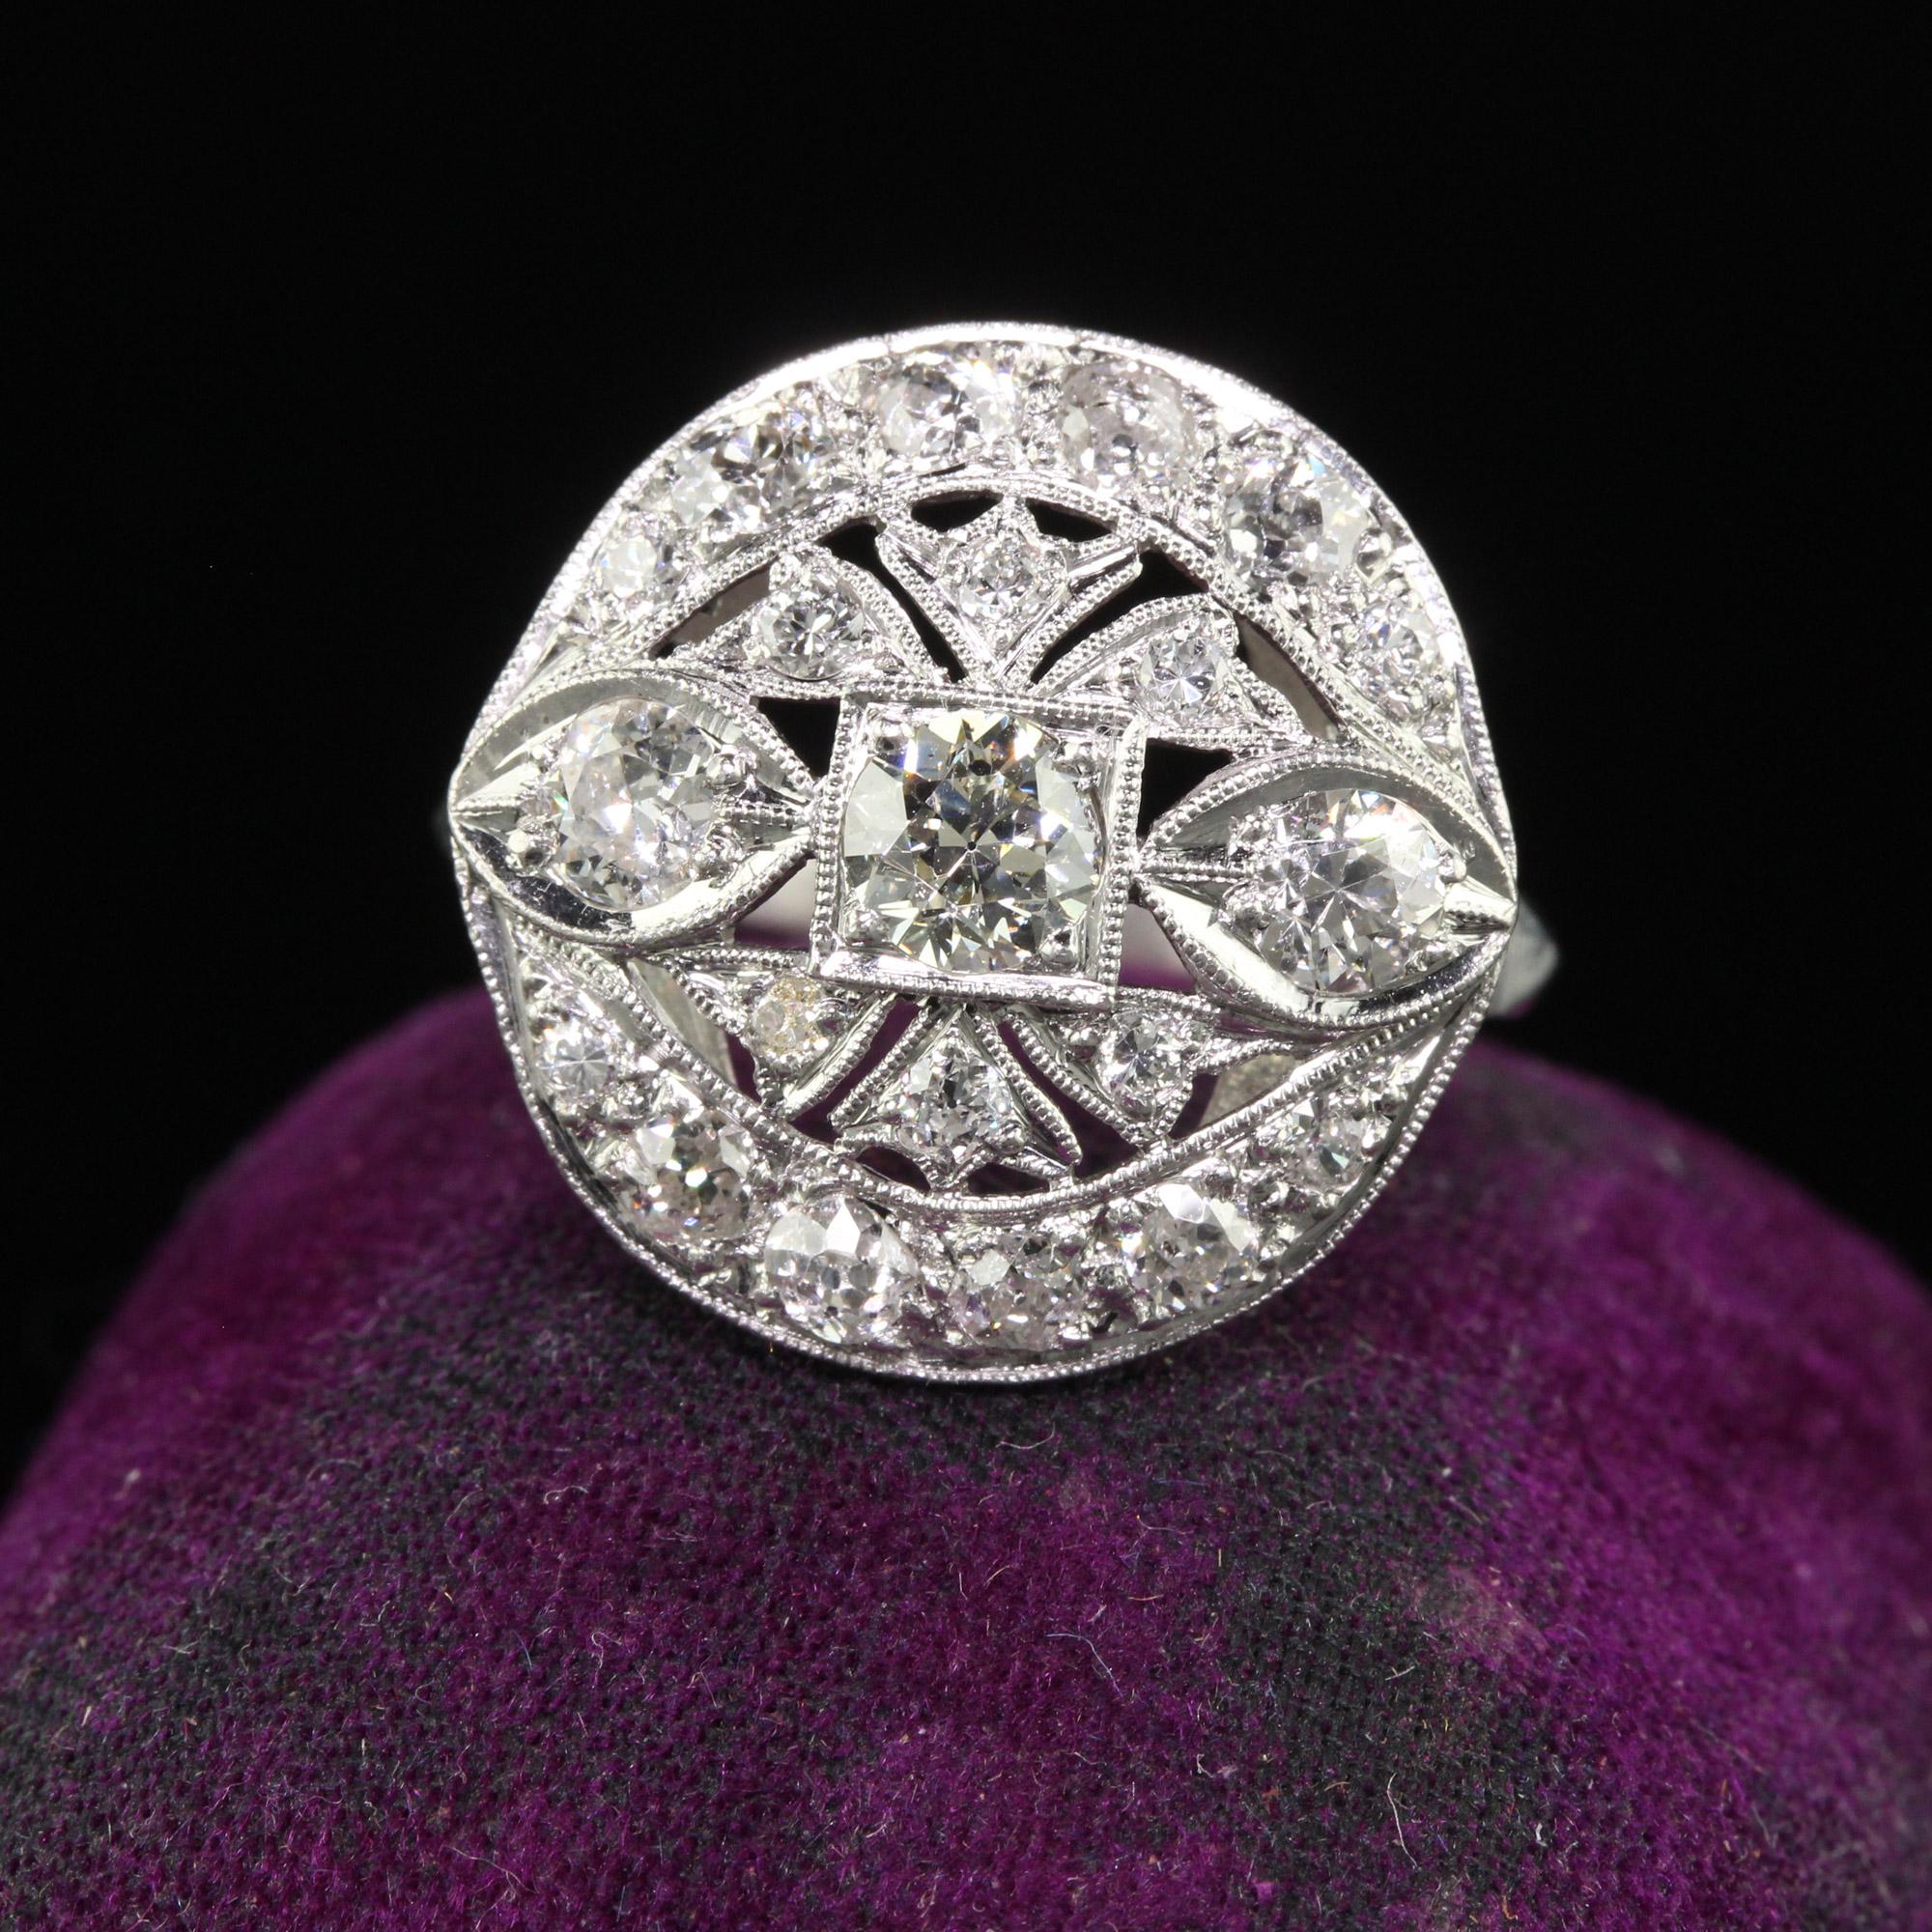 Beautiful Antique Art Deco Platinum Old European Diamond Filigree Cocktail Ring. This gorgeous Art Deco cocktail ring is crafted in platinum. The center holds a beautiful old European cut diamond and has chunky old European cut diamonds through the